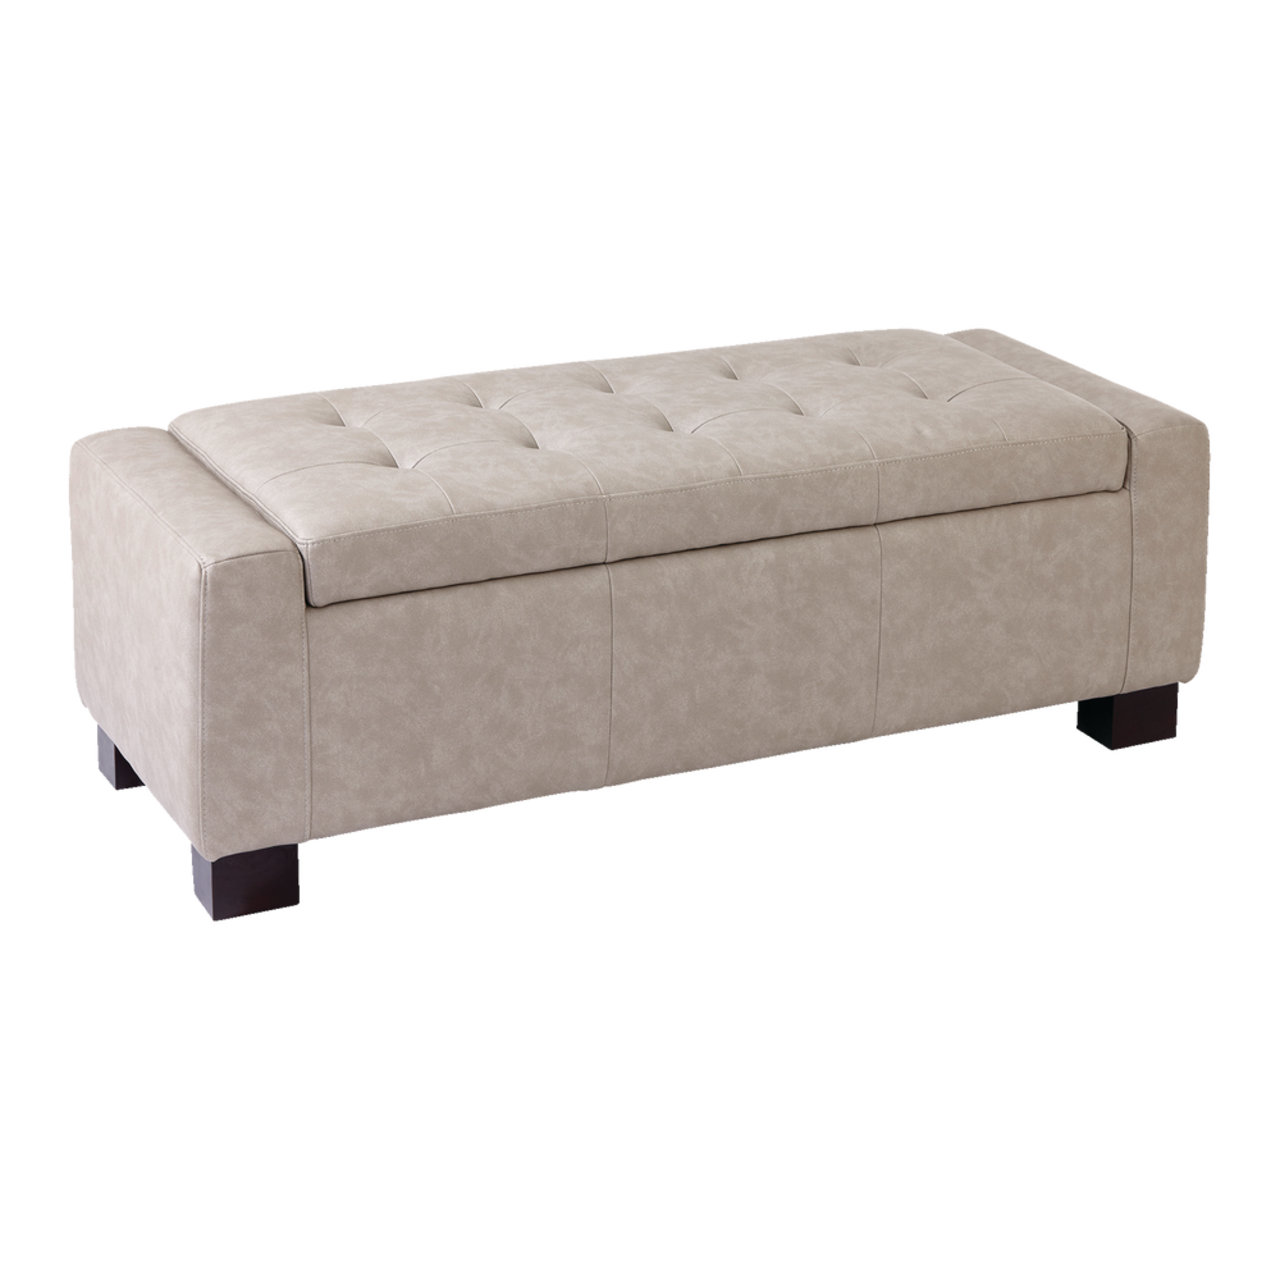 https://media-www.canadiantire.ca/product/living/home-decor/furniture/1680023/canvas-louisa-ottoman-with-storage-bb571702-ab3f-4283-9ed3-005a023976fa.png?imdensity=1&imwidth=640&impolicy=mZoom